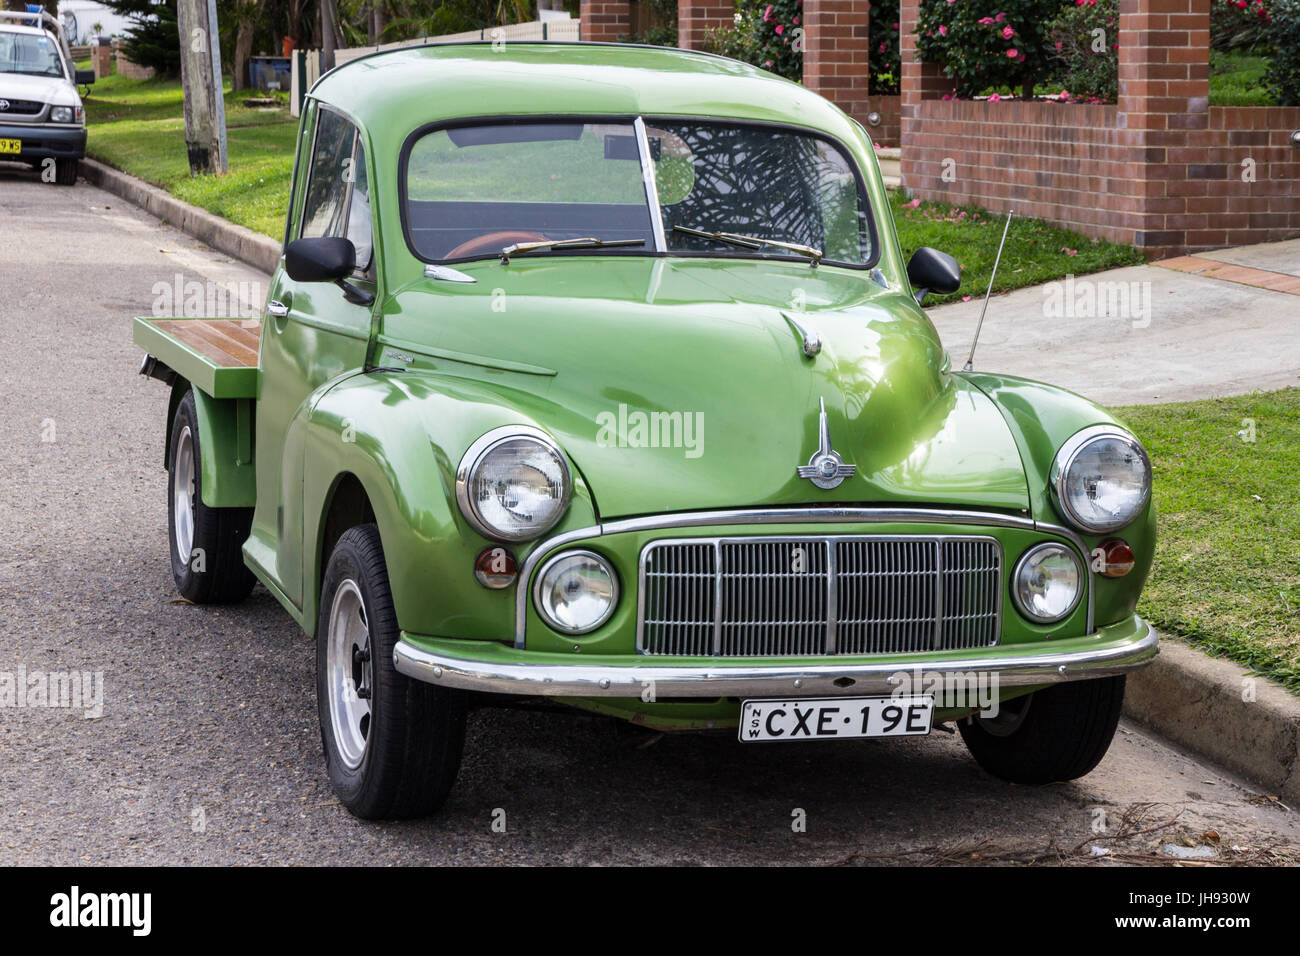 C;assic Morris Minor conversion to a flatbed truck Stock Photo - Alamy